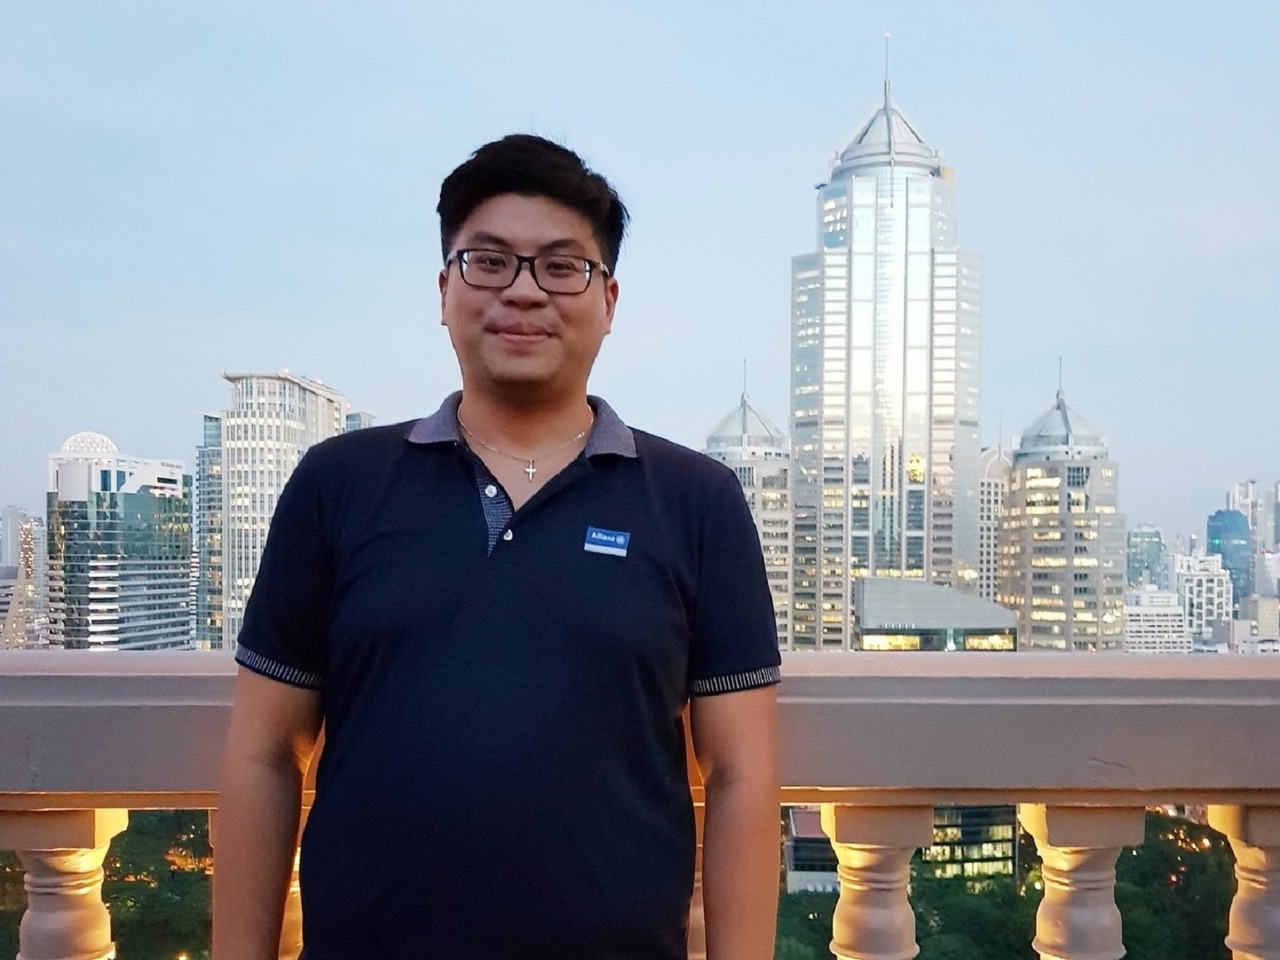 “After graduating from Curtin Malaysia in 2017, I joined Allianz Partners, Thailand in Bangkok. One of my main job roles is to produce operational, financial performance and workforce management reports for our stakeholders. “I am fortunate to work...